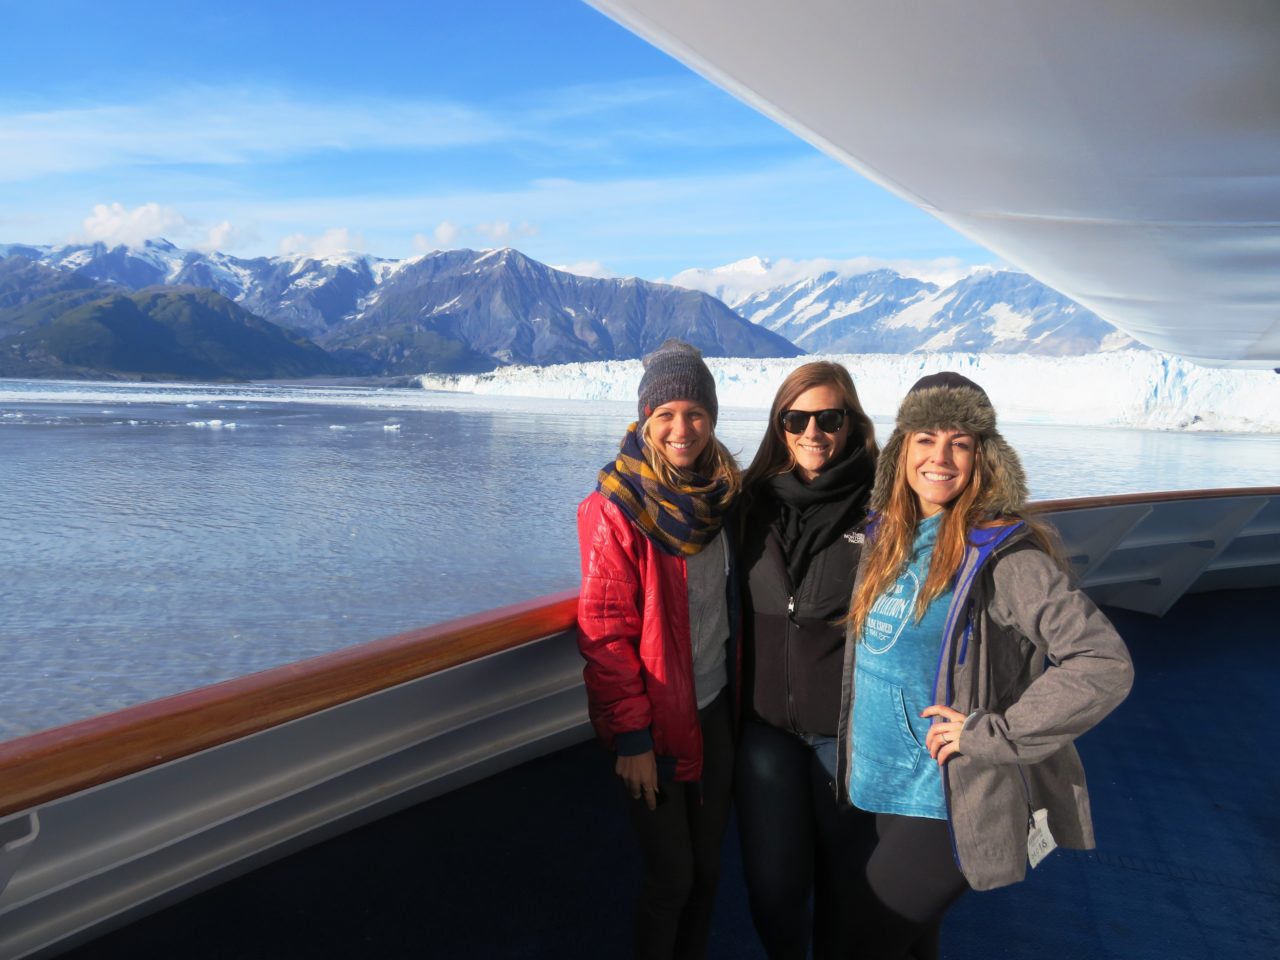 Three of our fellow travelers during our Alaska Cruise with Princess Cruises